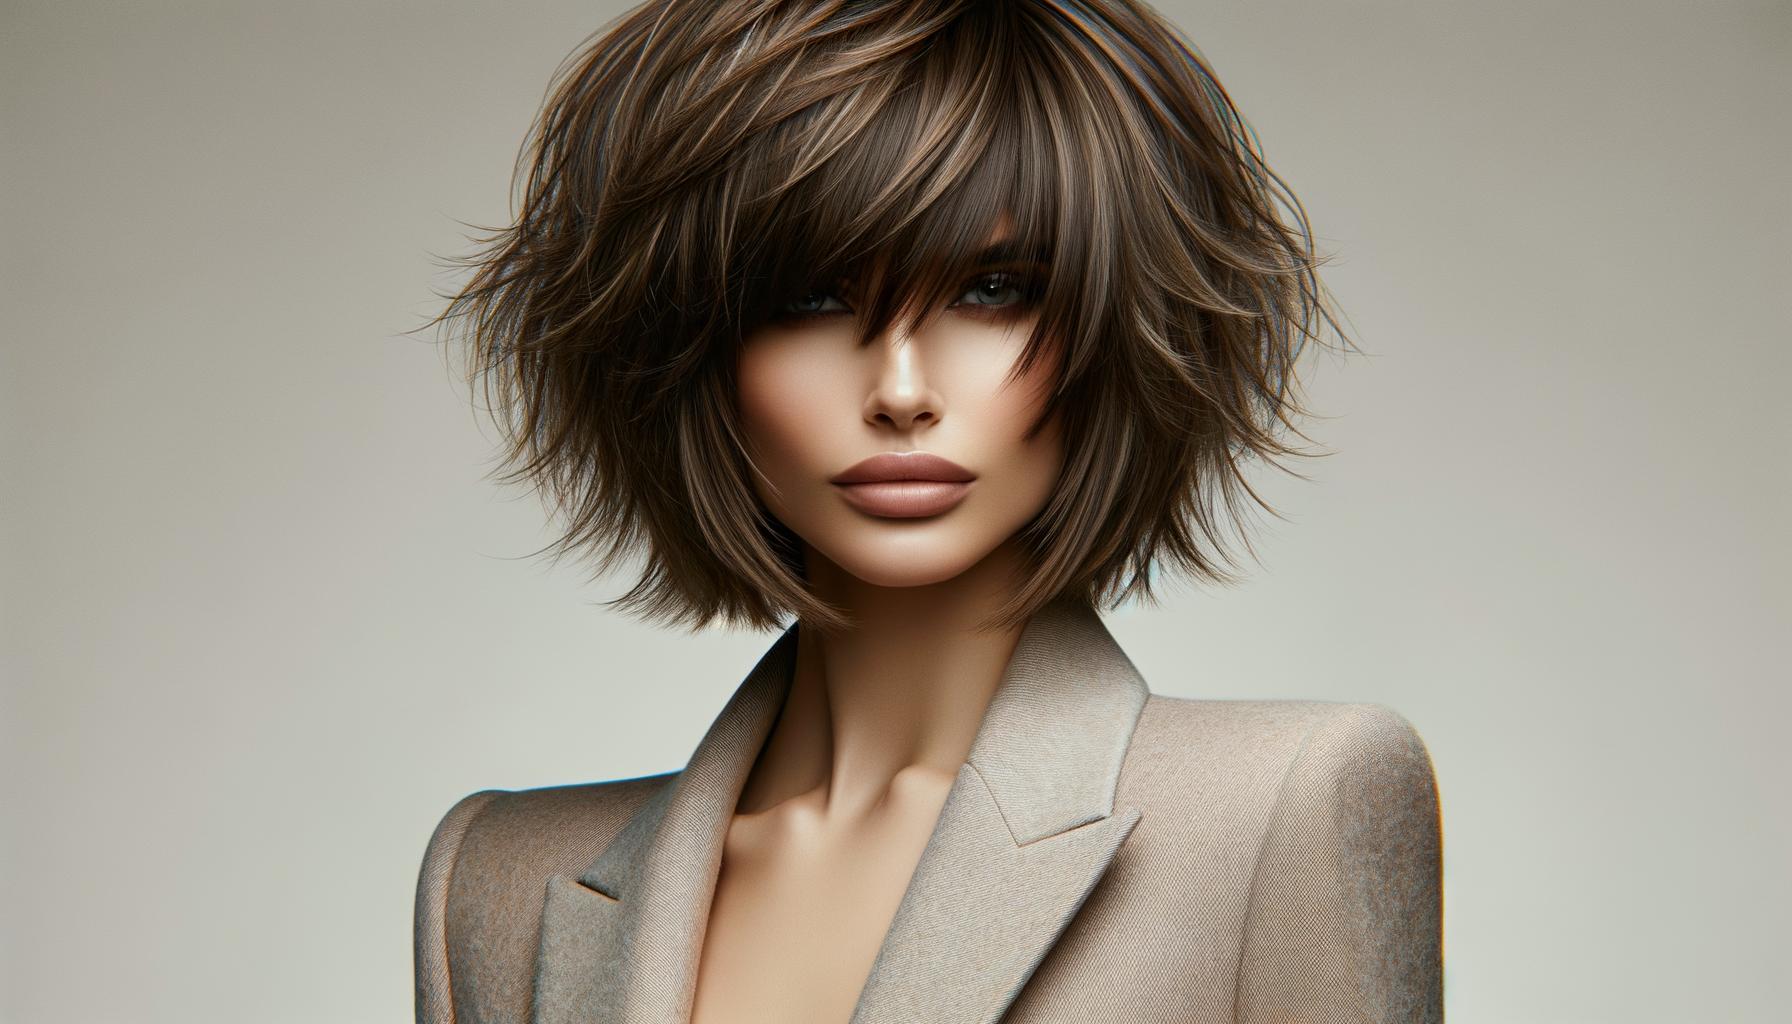 Get inspired by the iconic LISA RINNA HAIRCUT for a chic change